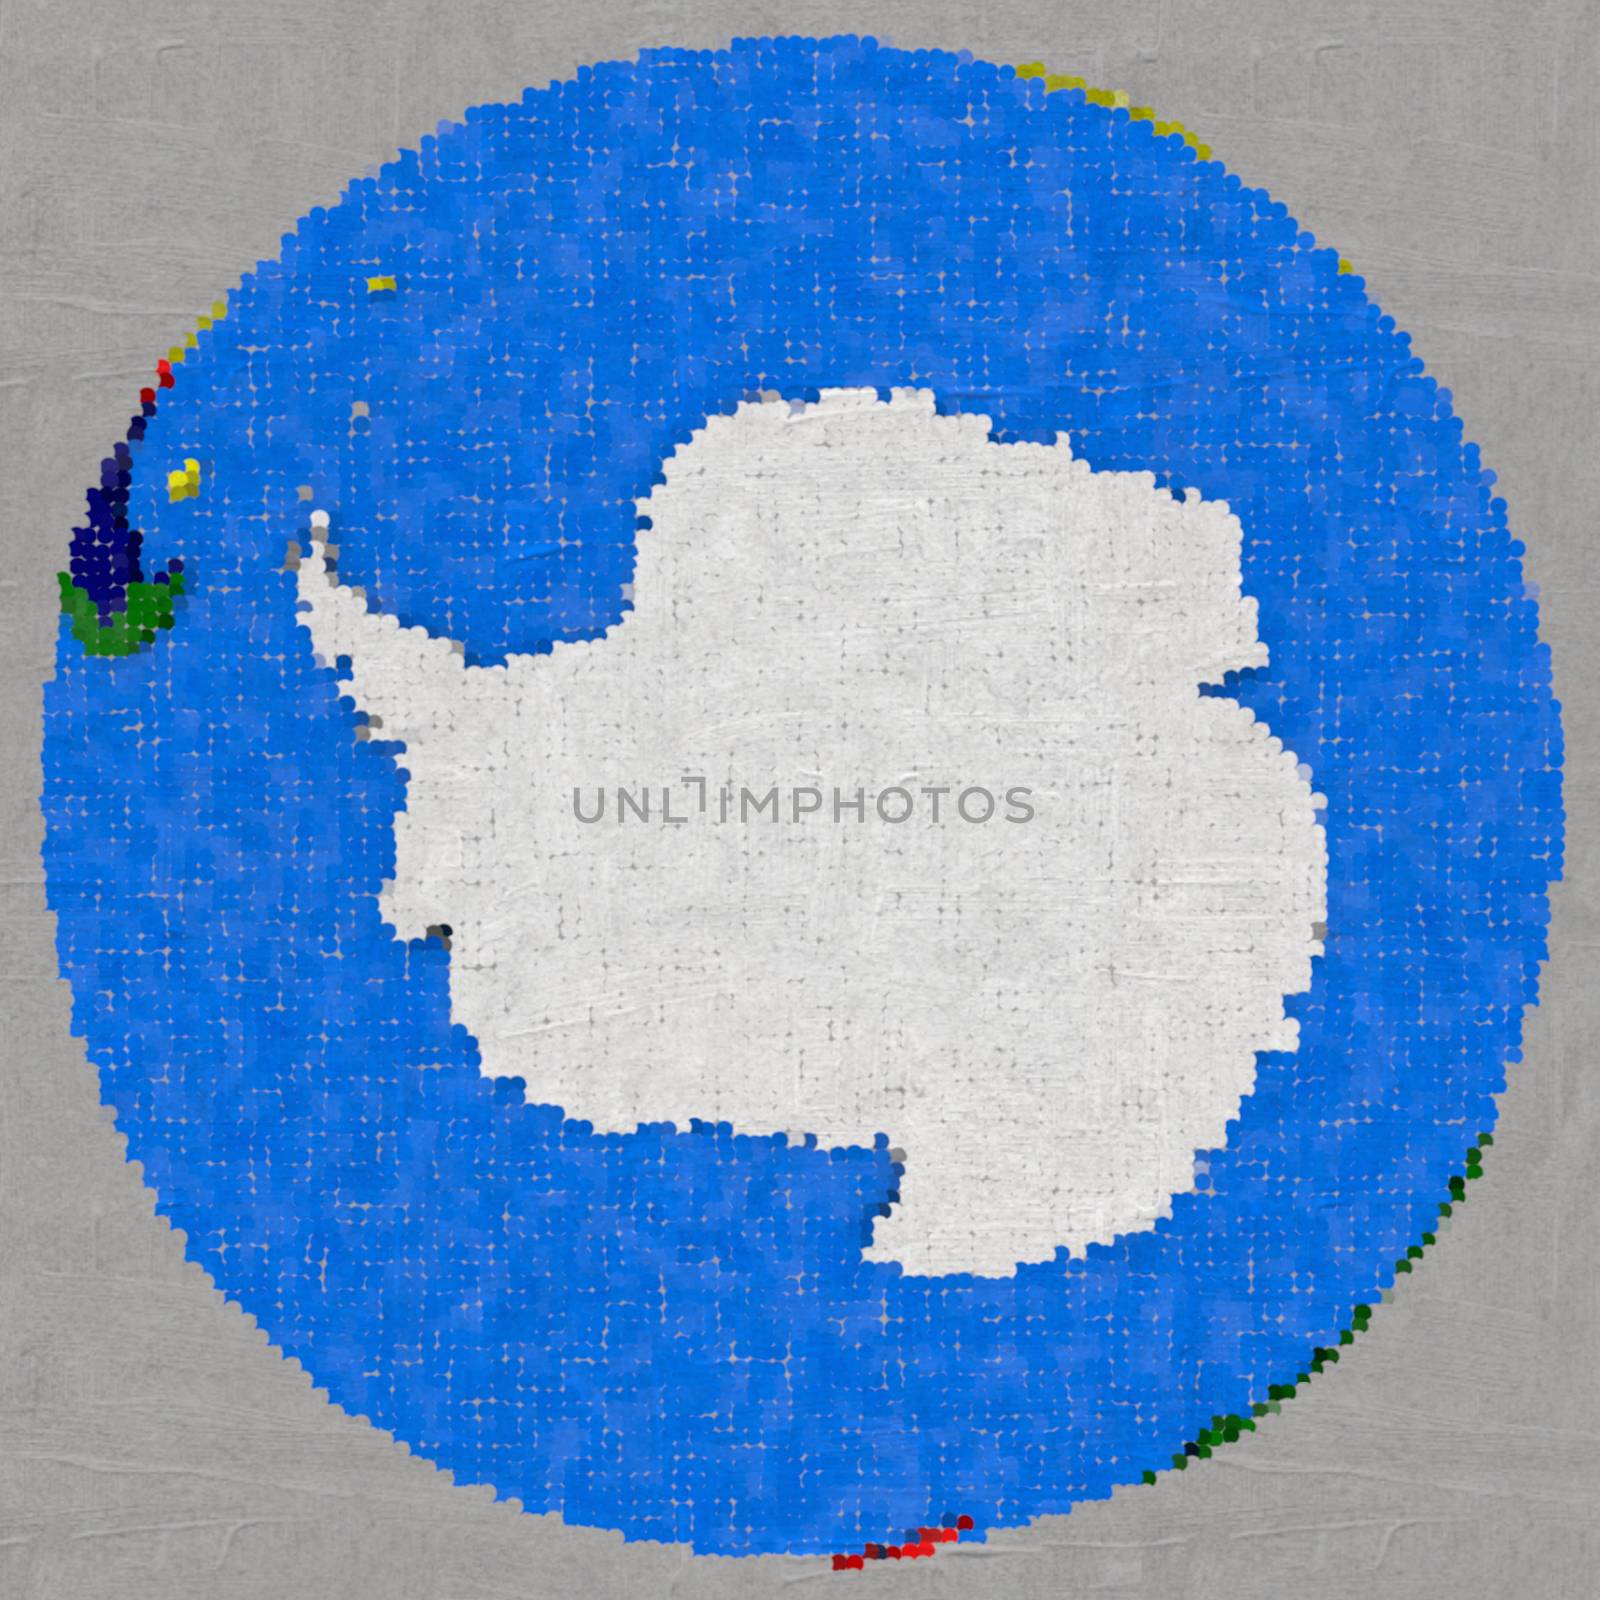 Drawing of Antarctica on globe, dotted illustration